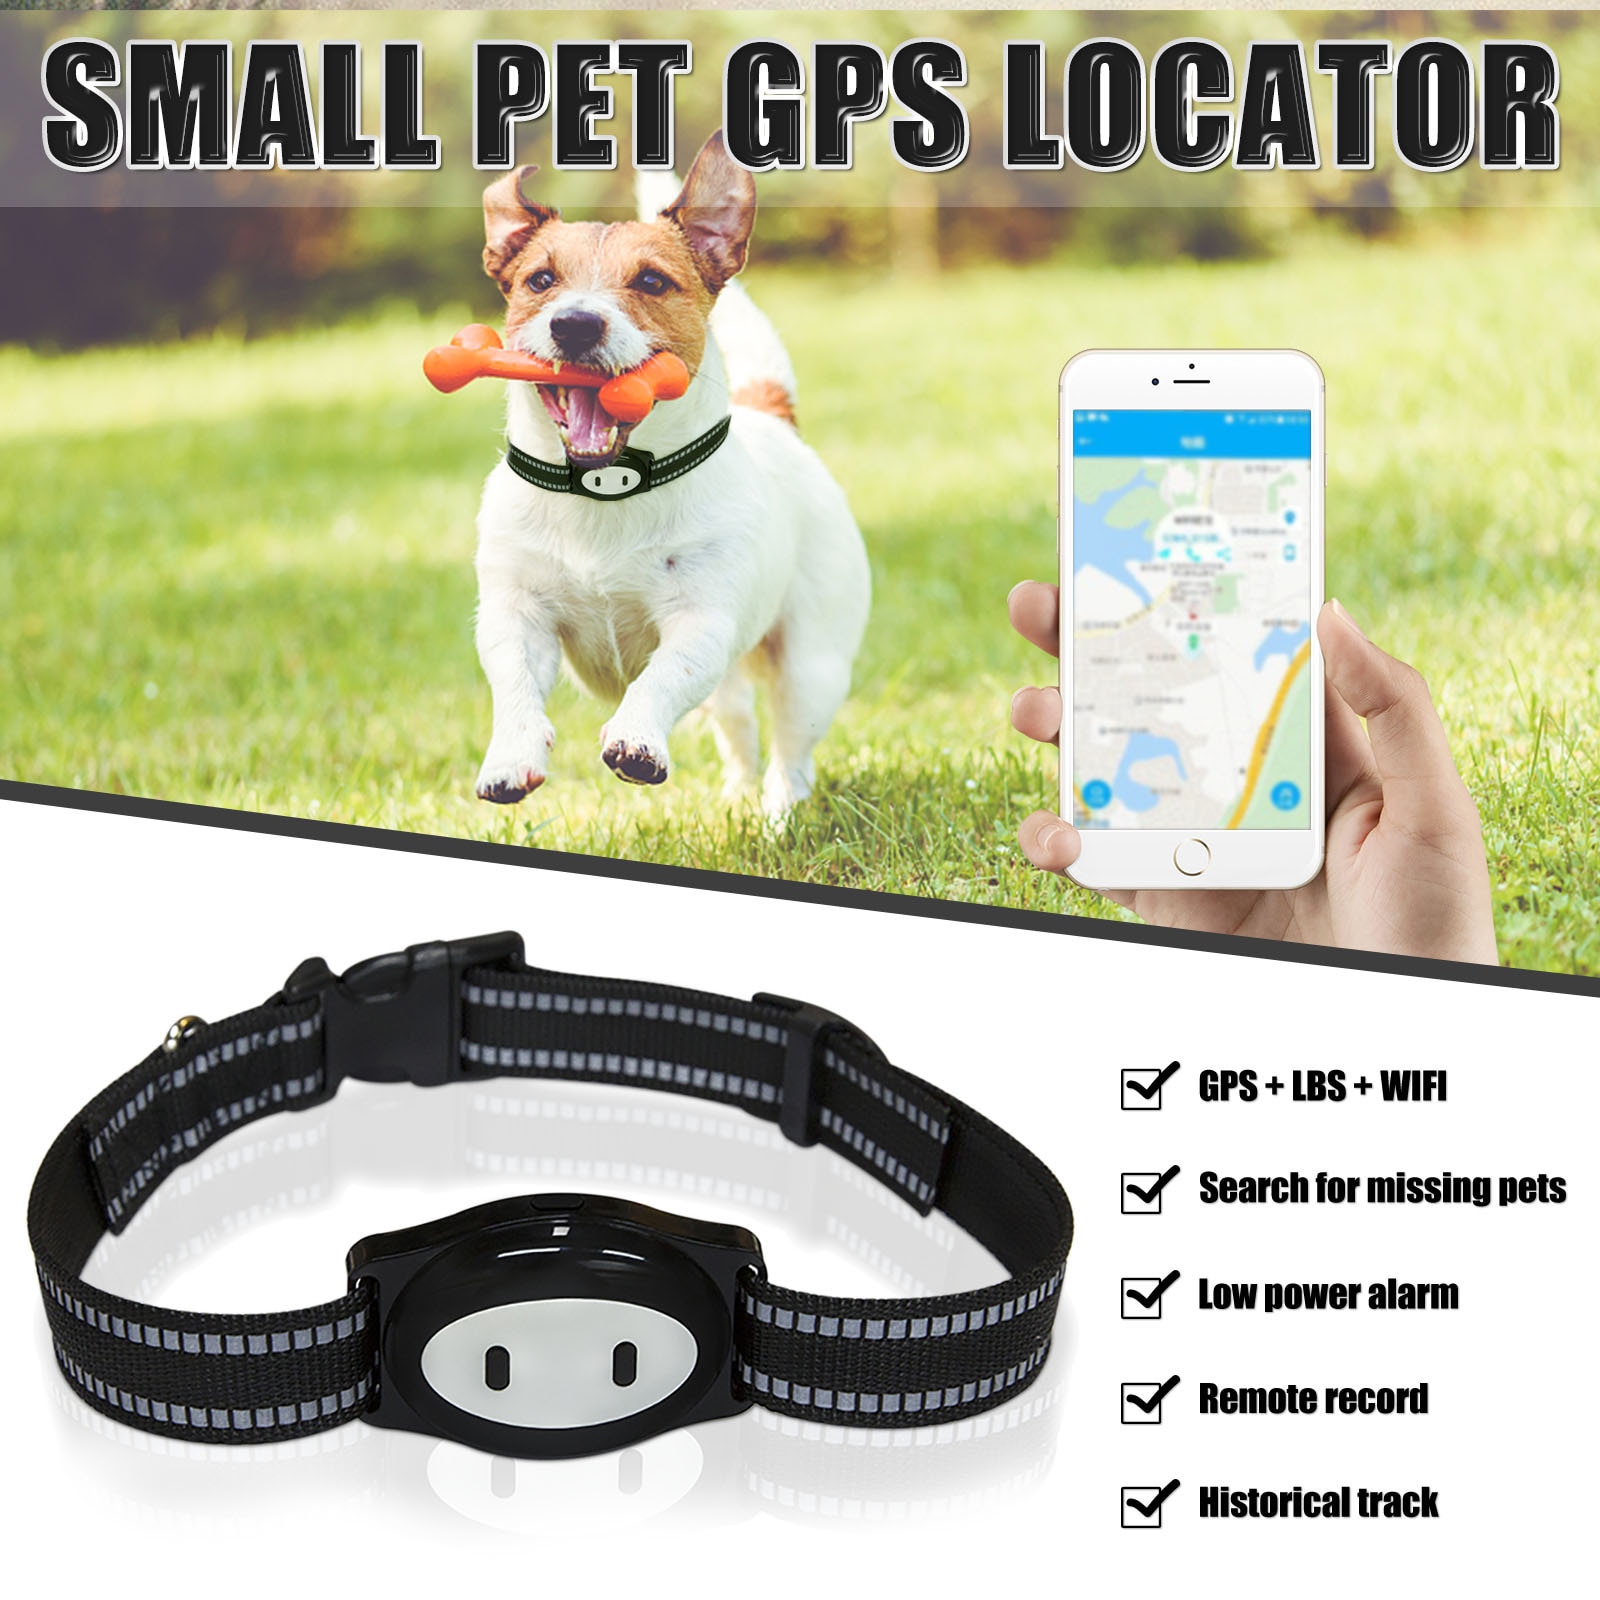 New-Arrival-IP67-Waterproof-Pet-Collar-GSM-AGPS-Wifi-LBS-Mini-Light-GPS-Tracker-for-Pets-Dogs-Cats-C-1005002153910060